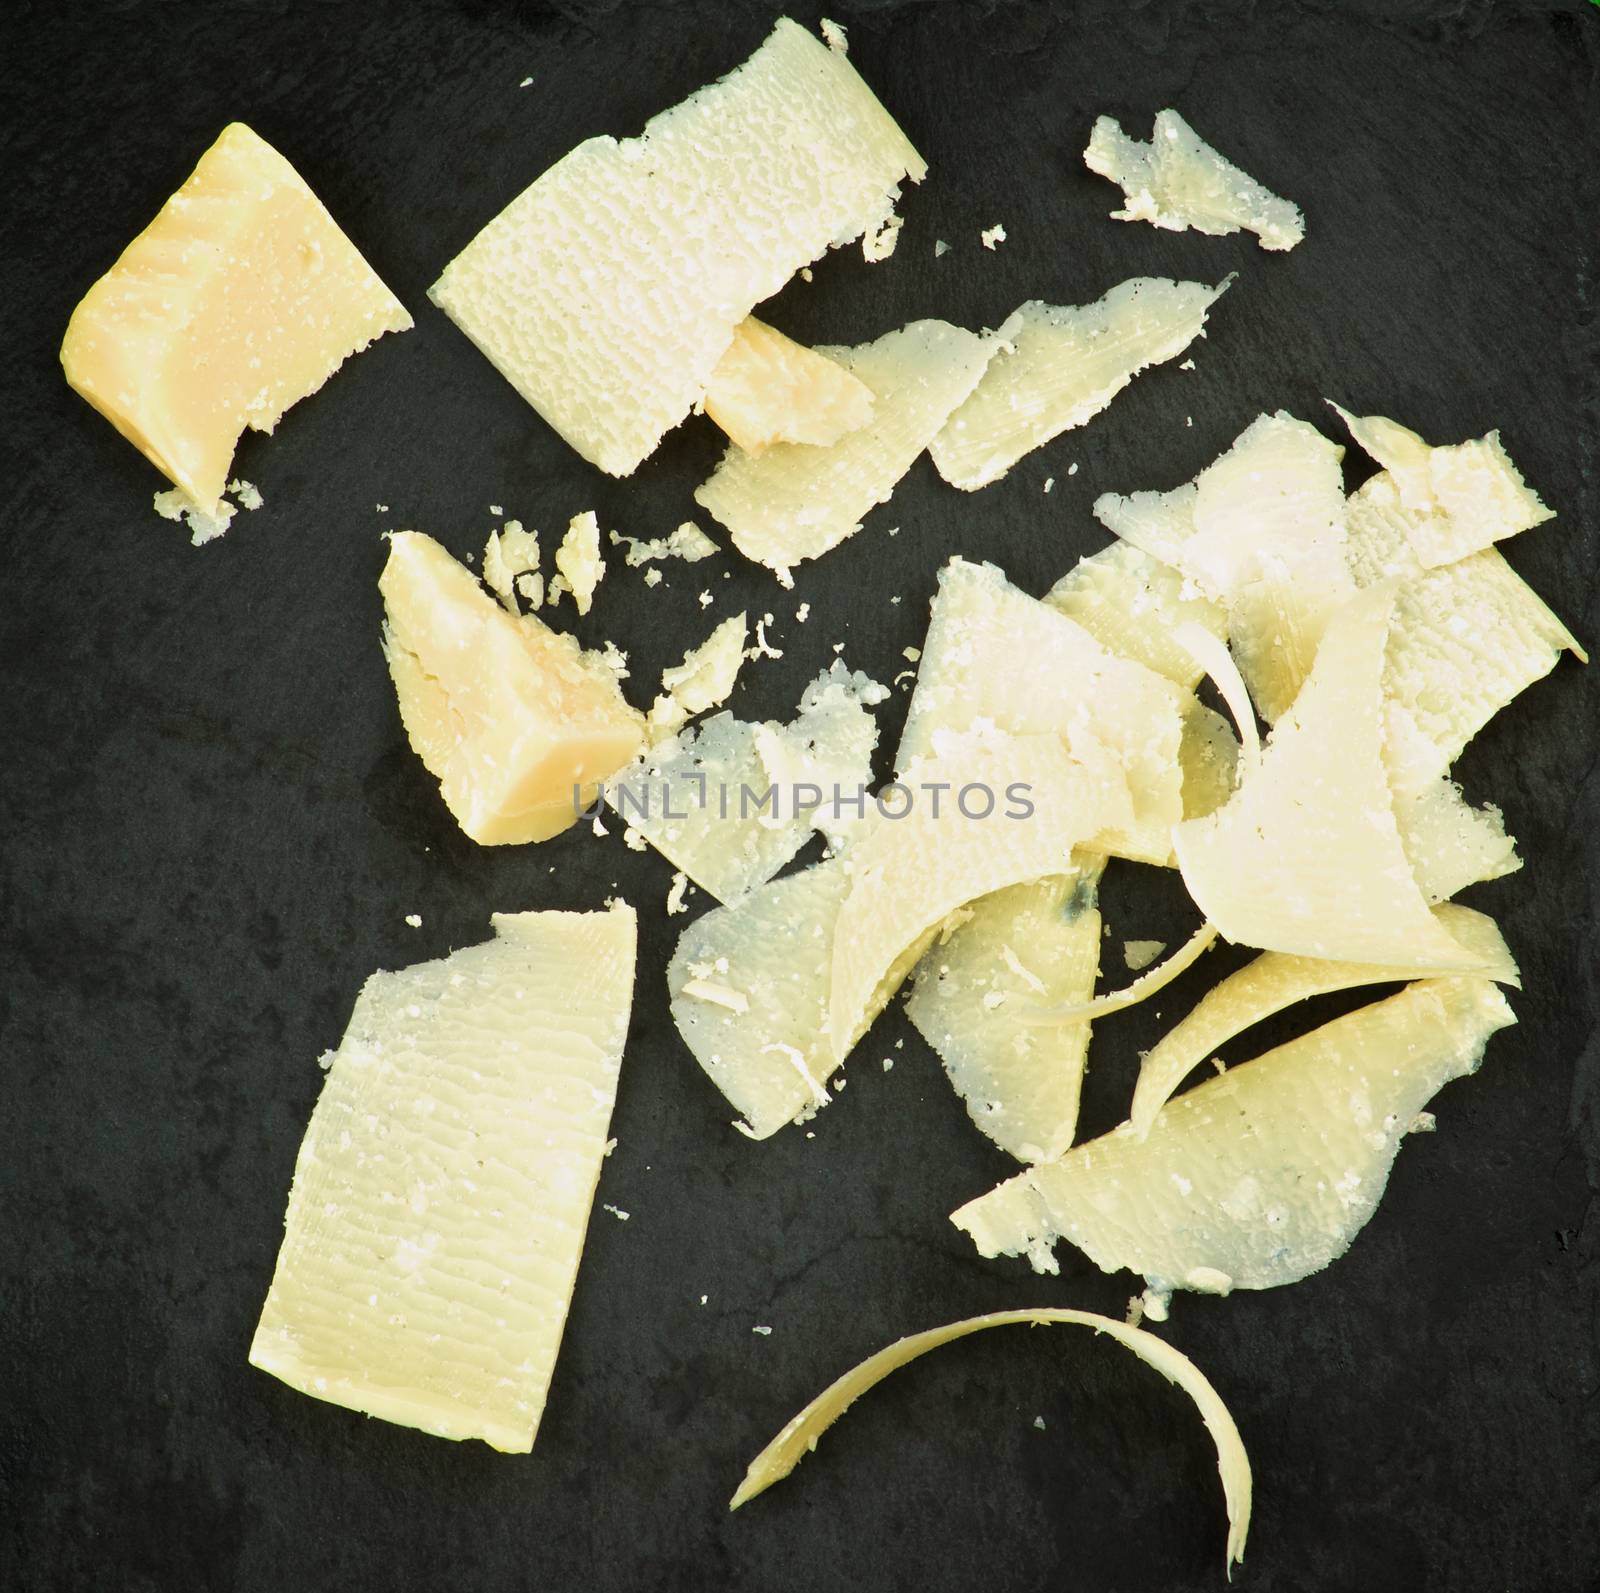 Slices of Gourmet Parmesan Cheese with Crumbs closeup on Black Stone background. Top View